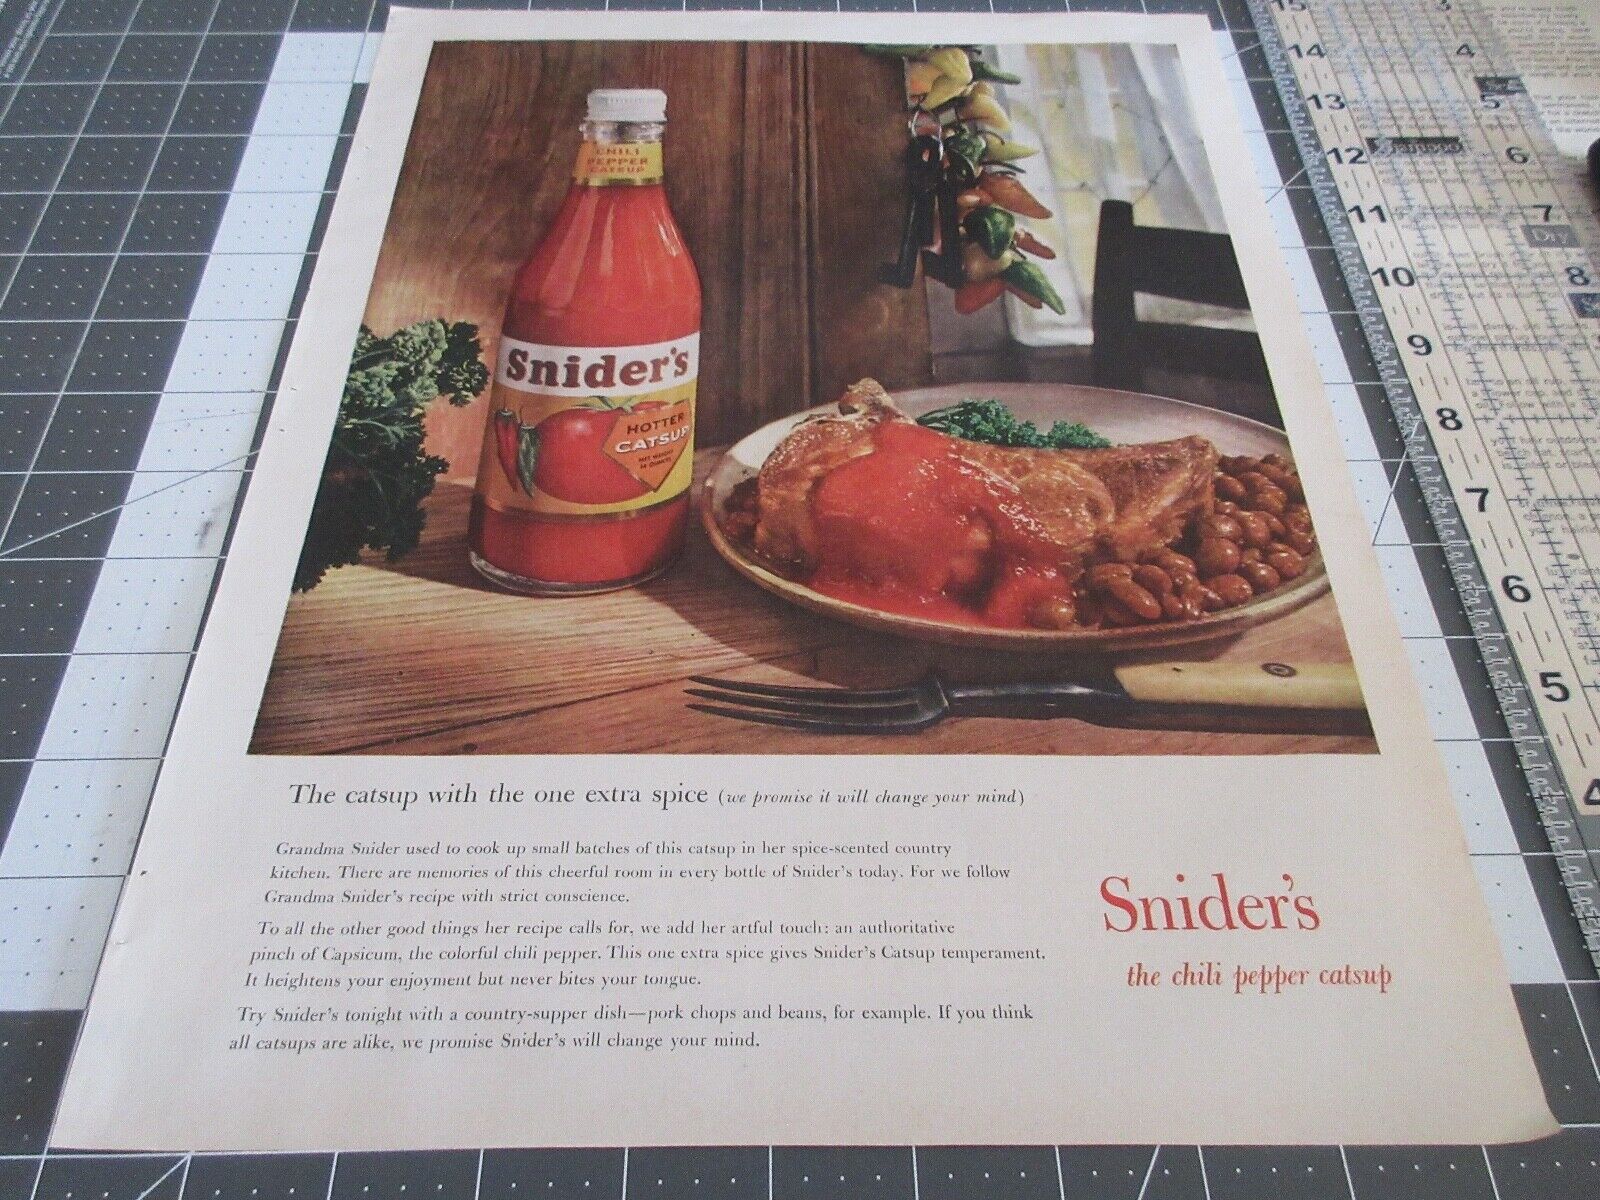 1959 Snider\'s Chili Pepper Catsup Ketchup Food Vintage Print Ad